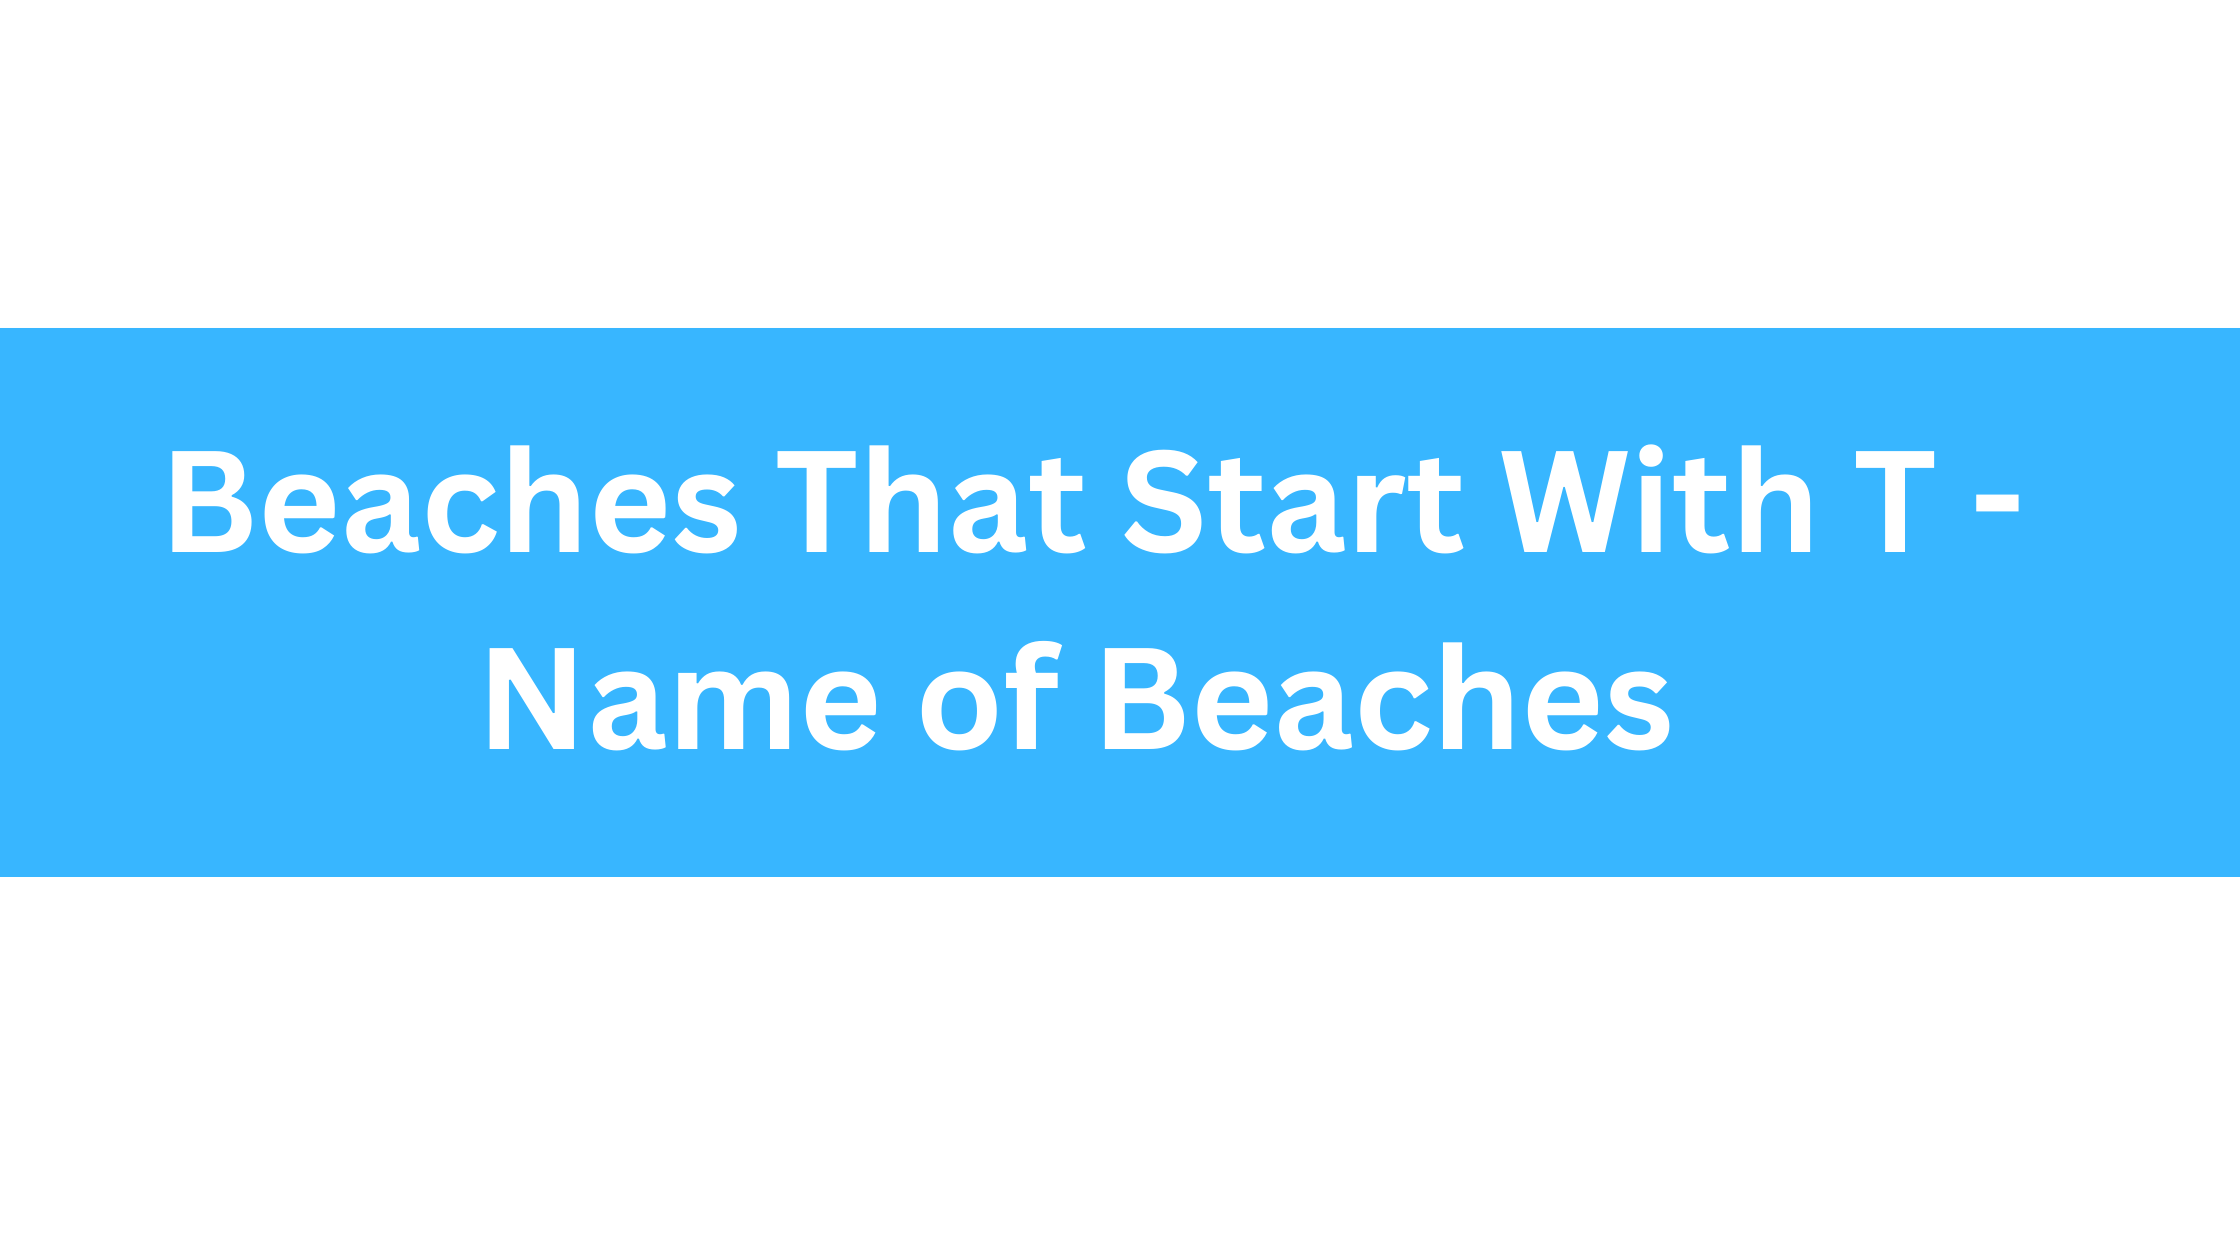 Beaches That Start With T